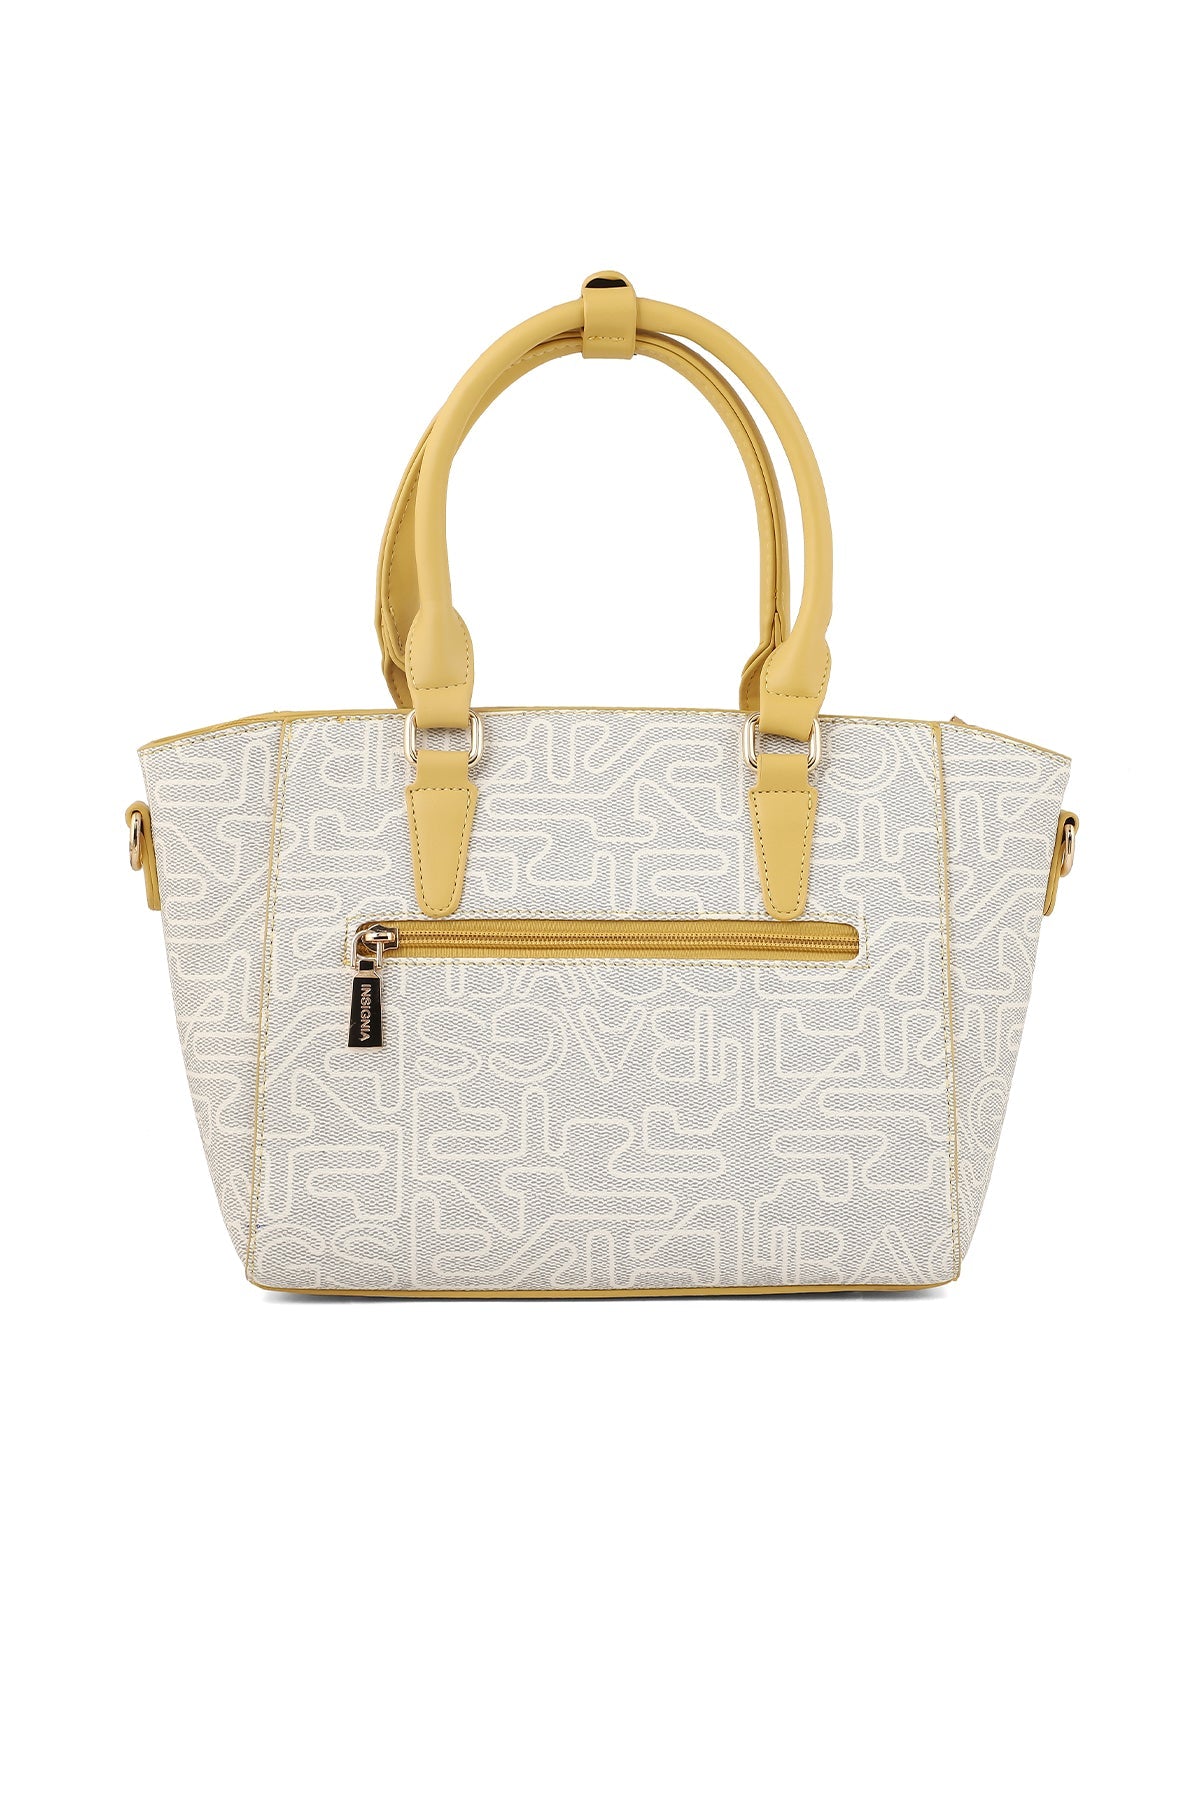 Trapeze Hand Bags B14946-Yellow